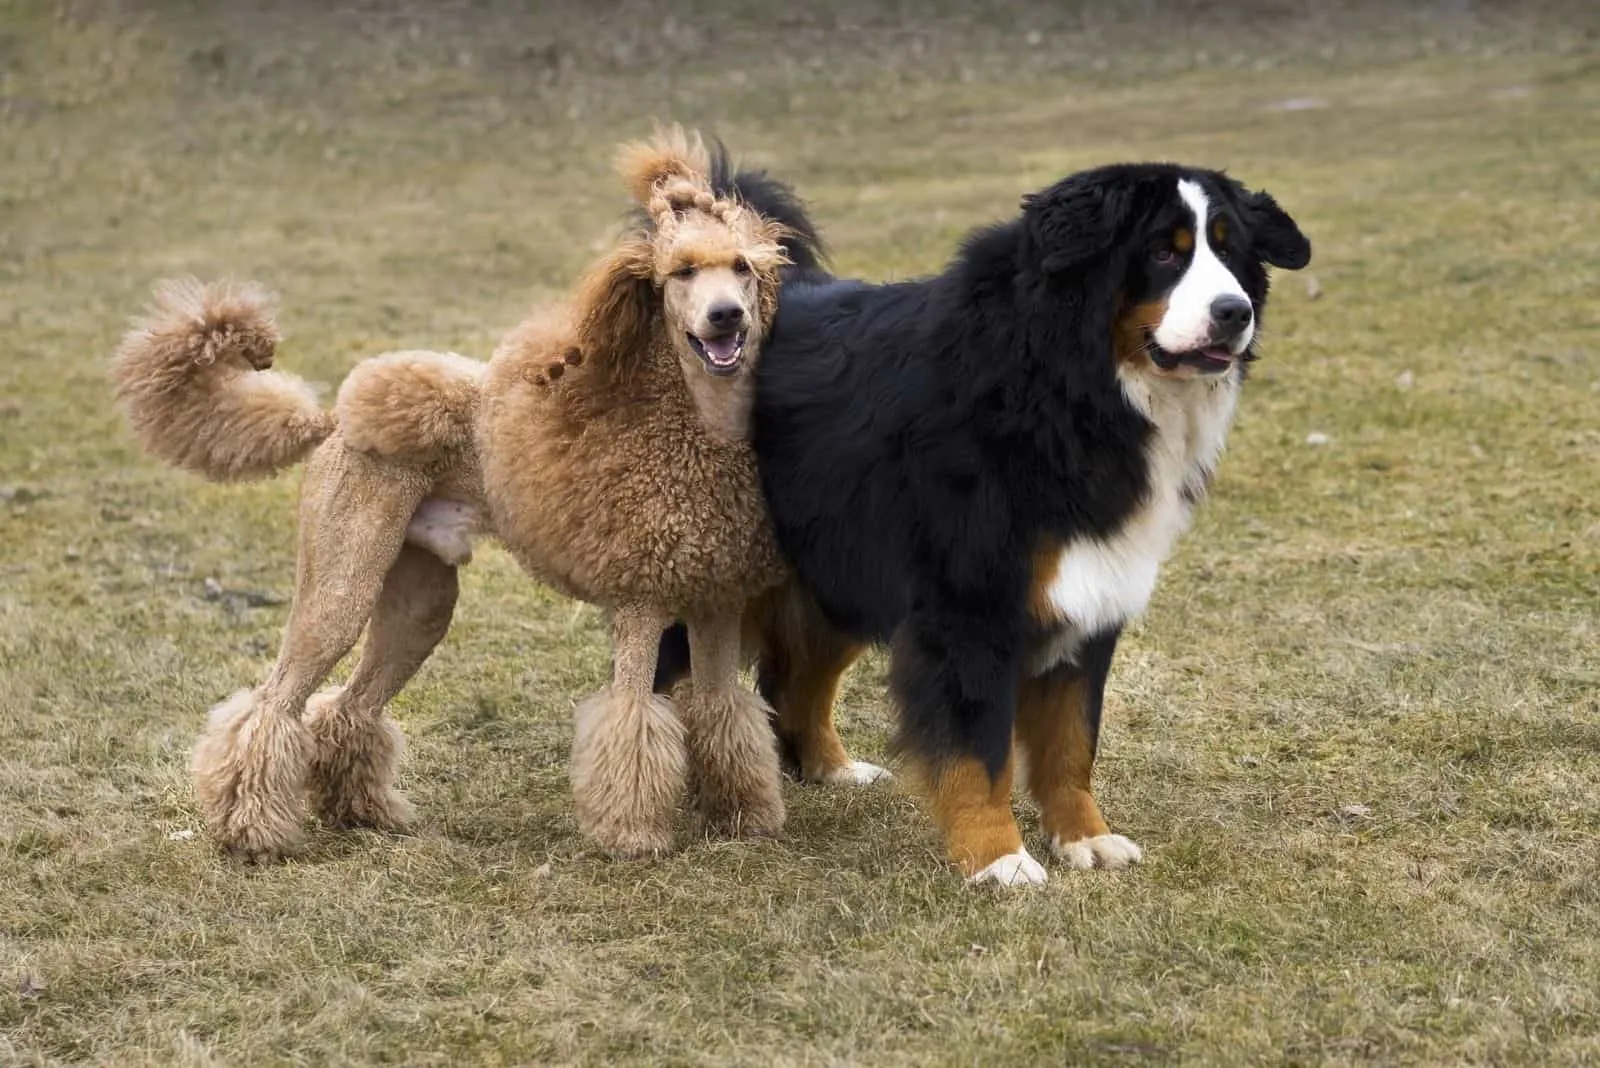 bernese mountain dog standing next to a standard poodle outdoors